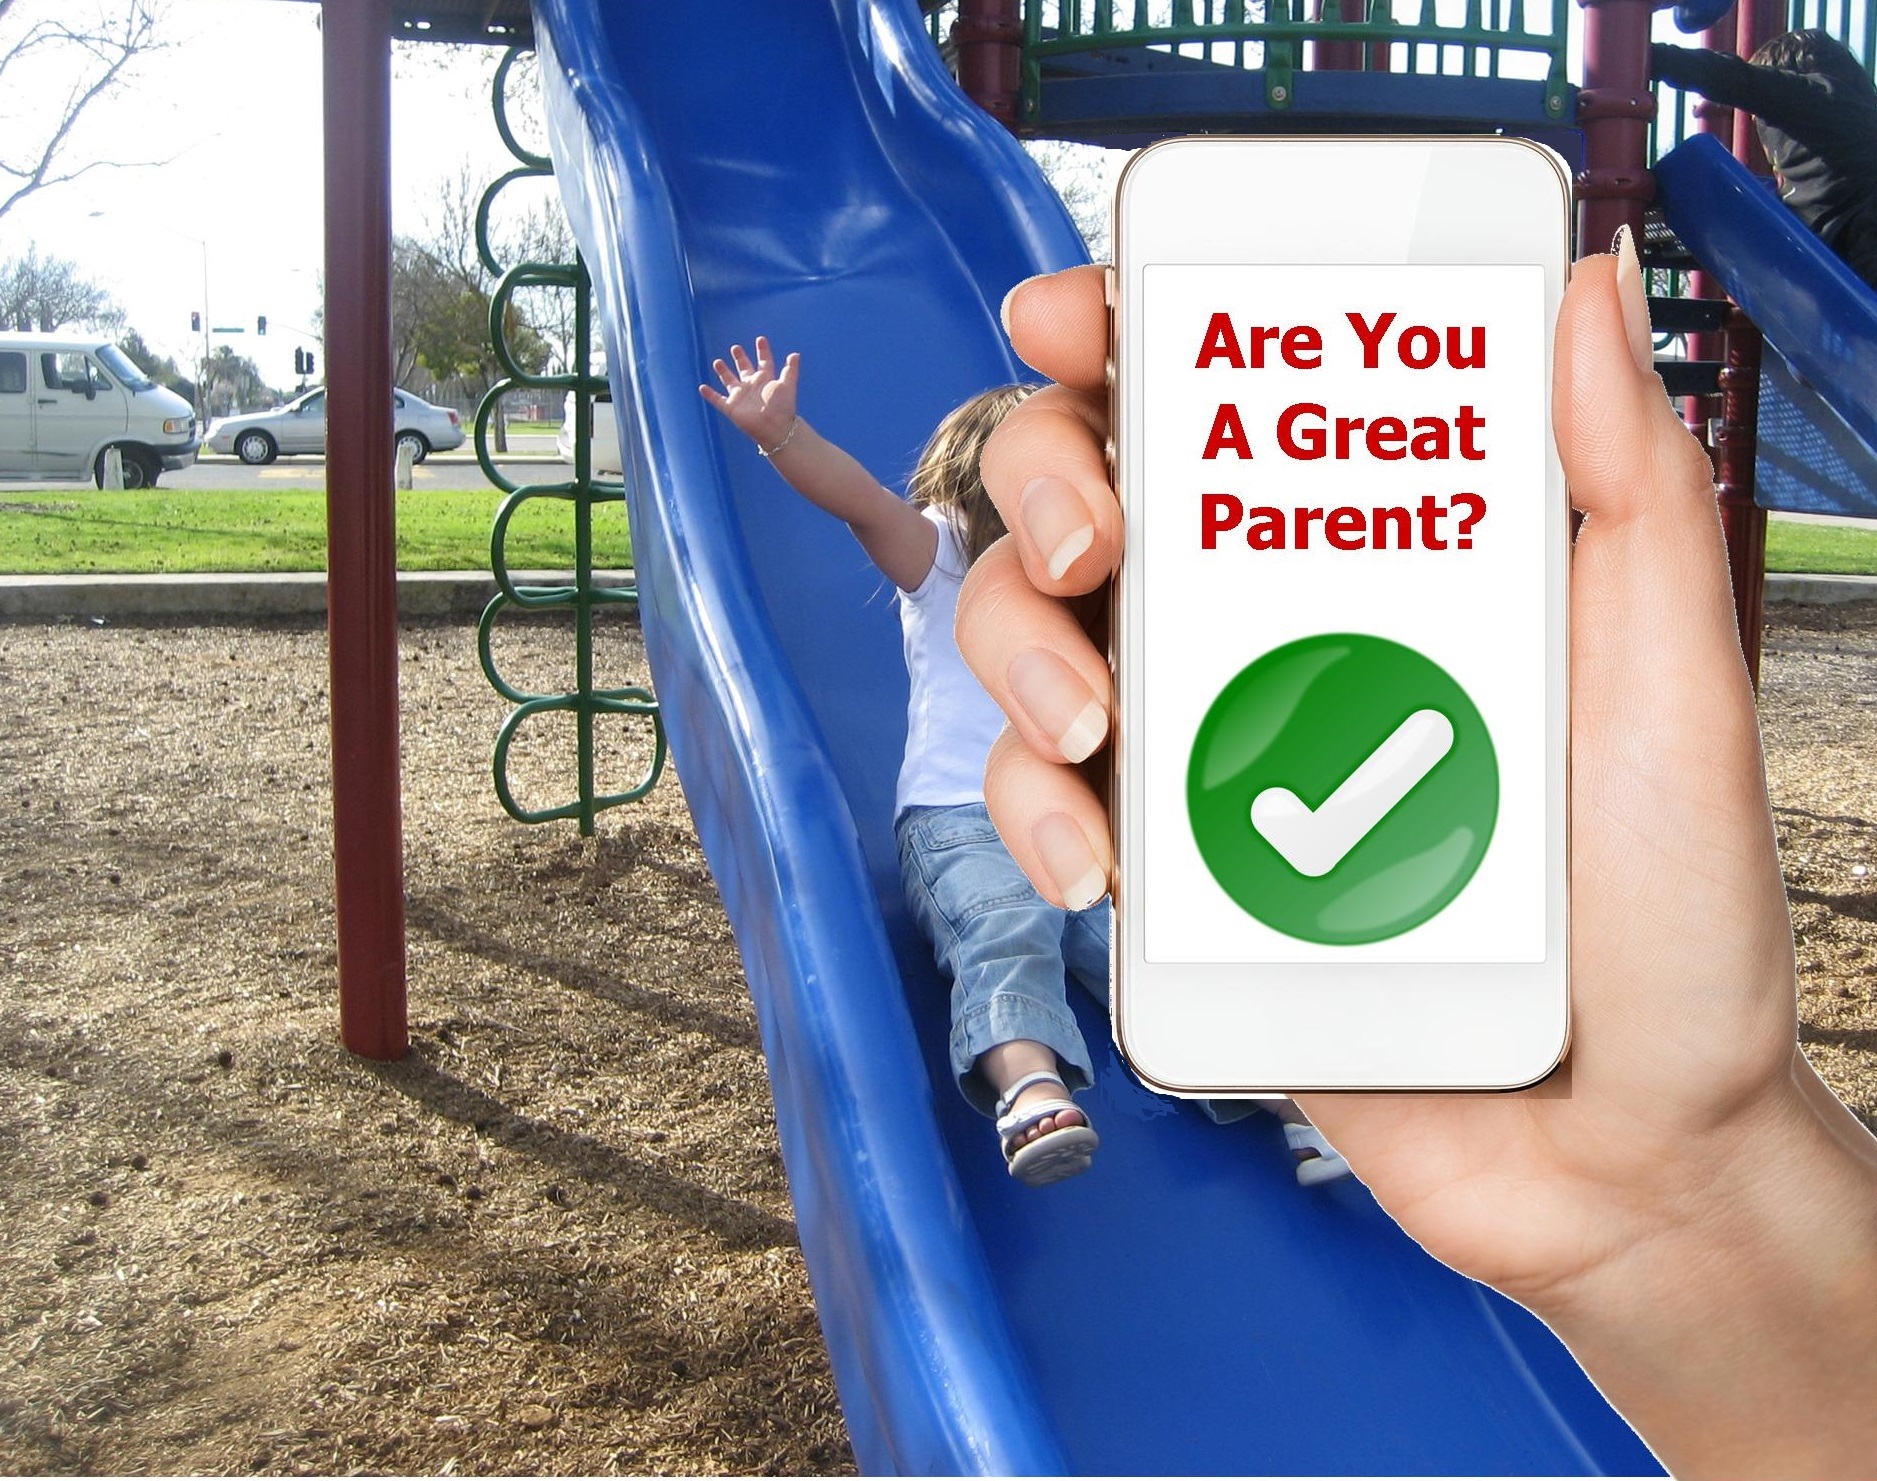 Do you watch your smartphone more than your kids at the playground?